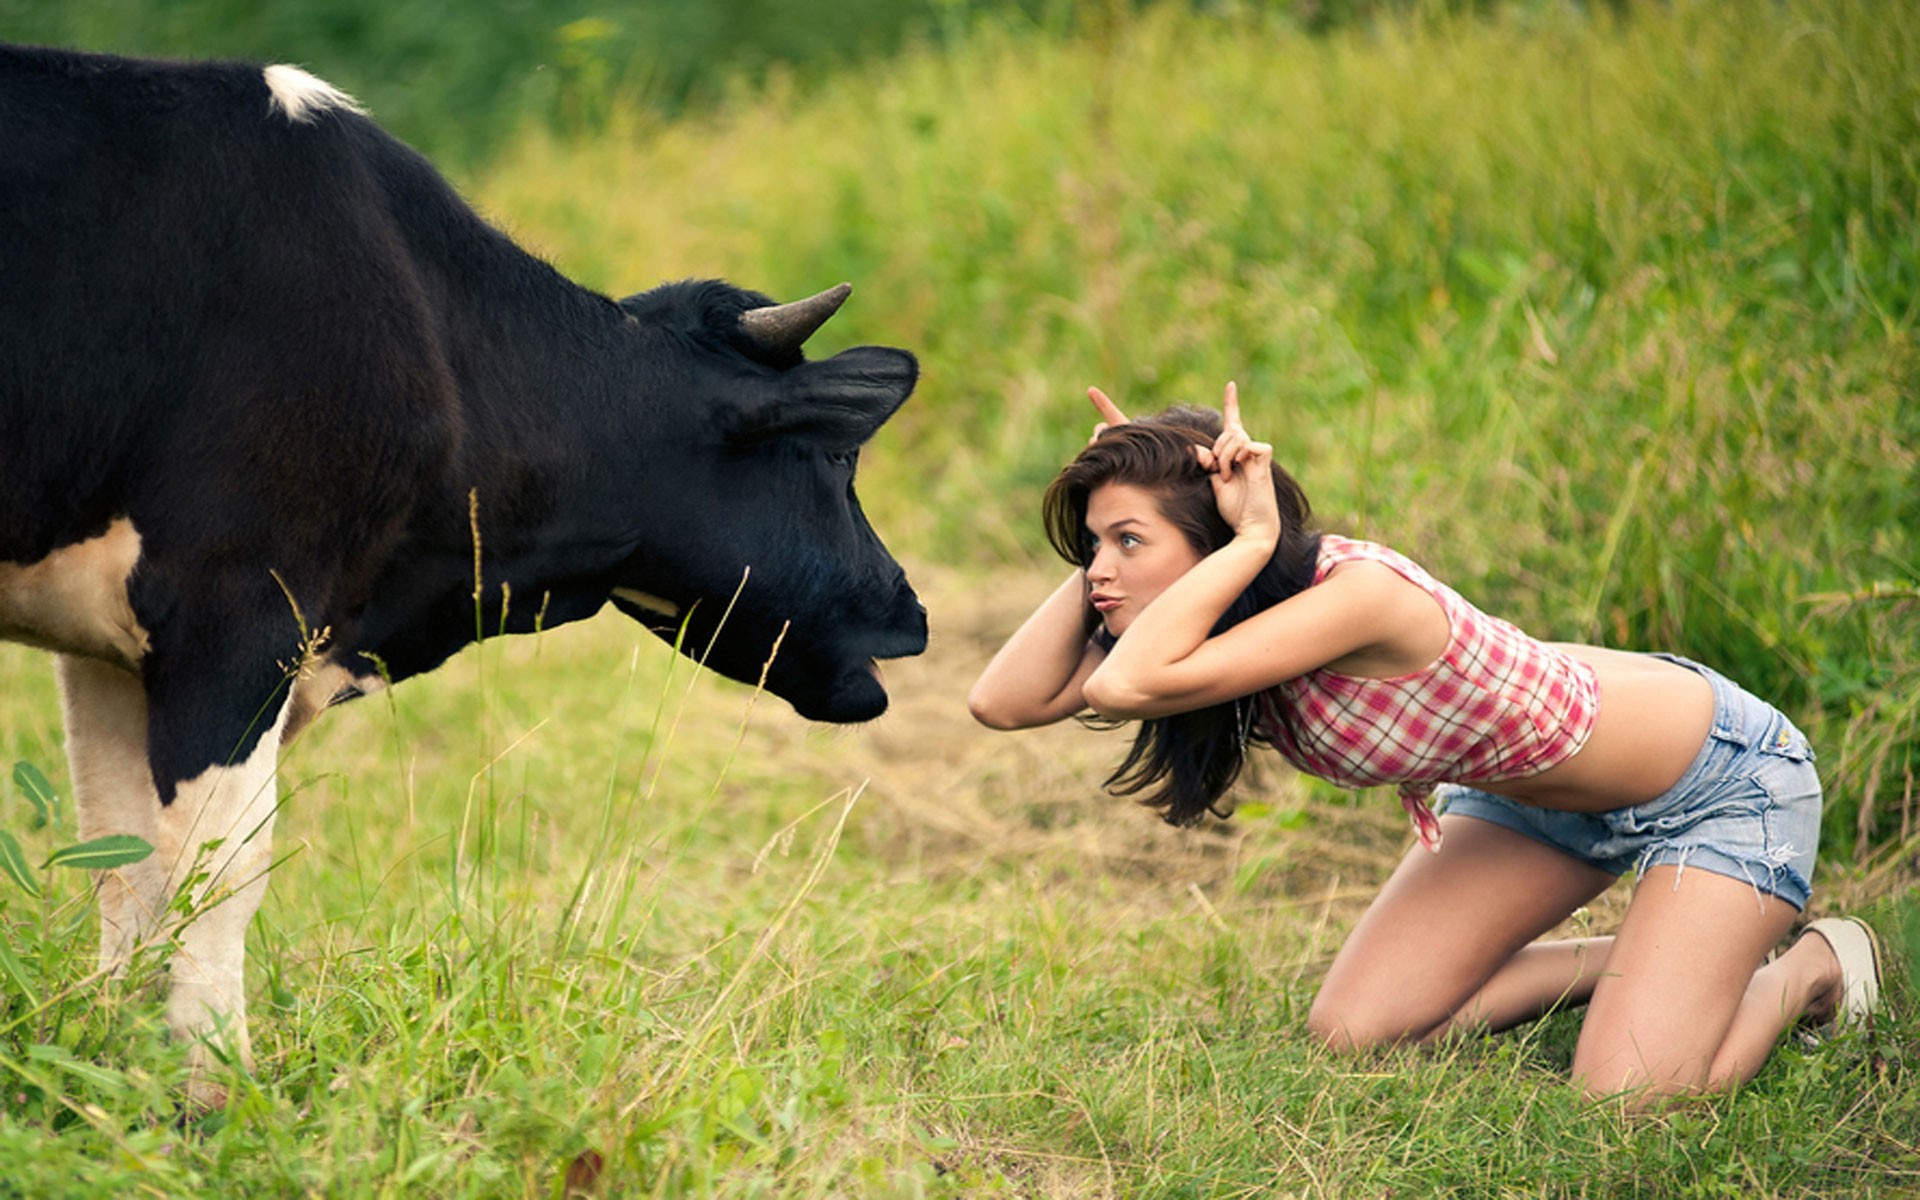 Girl with a cow wallpapers and images - wallpapers, pictures, photos